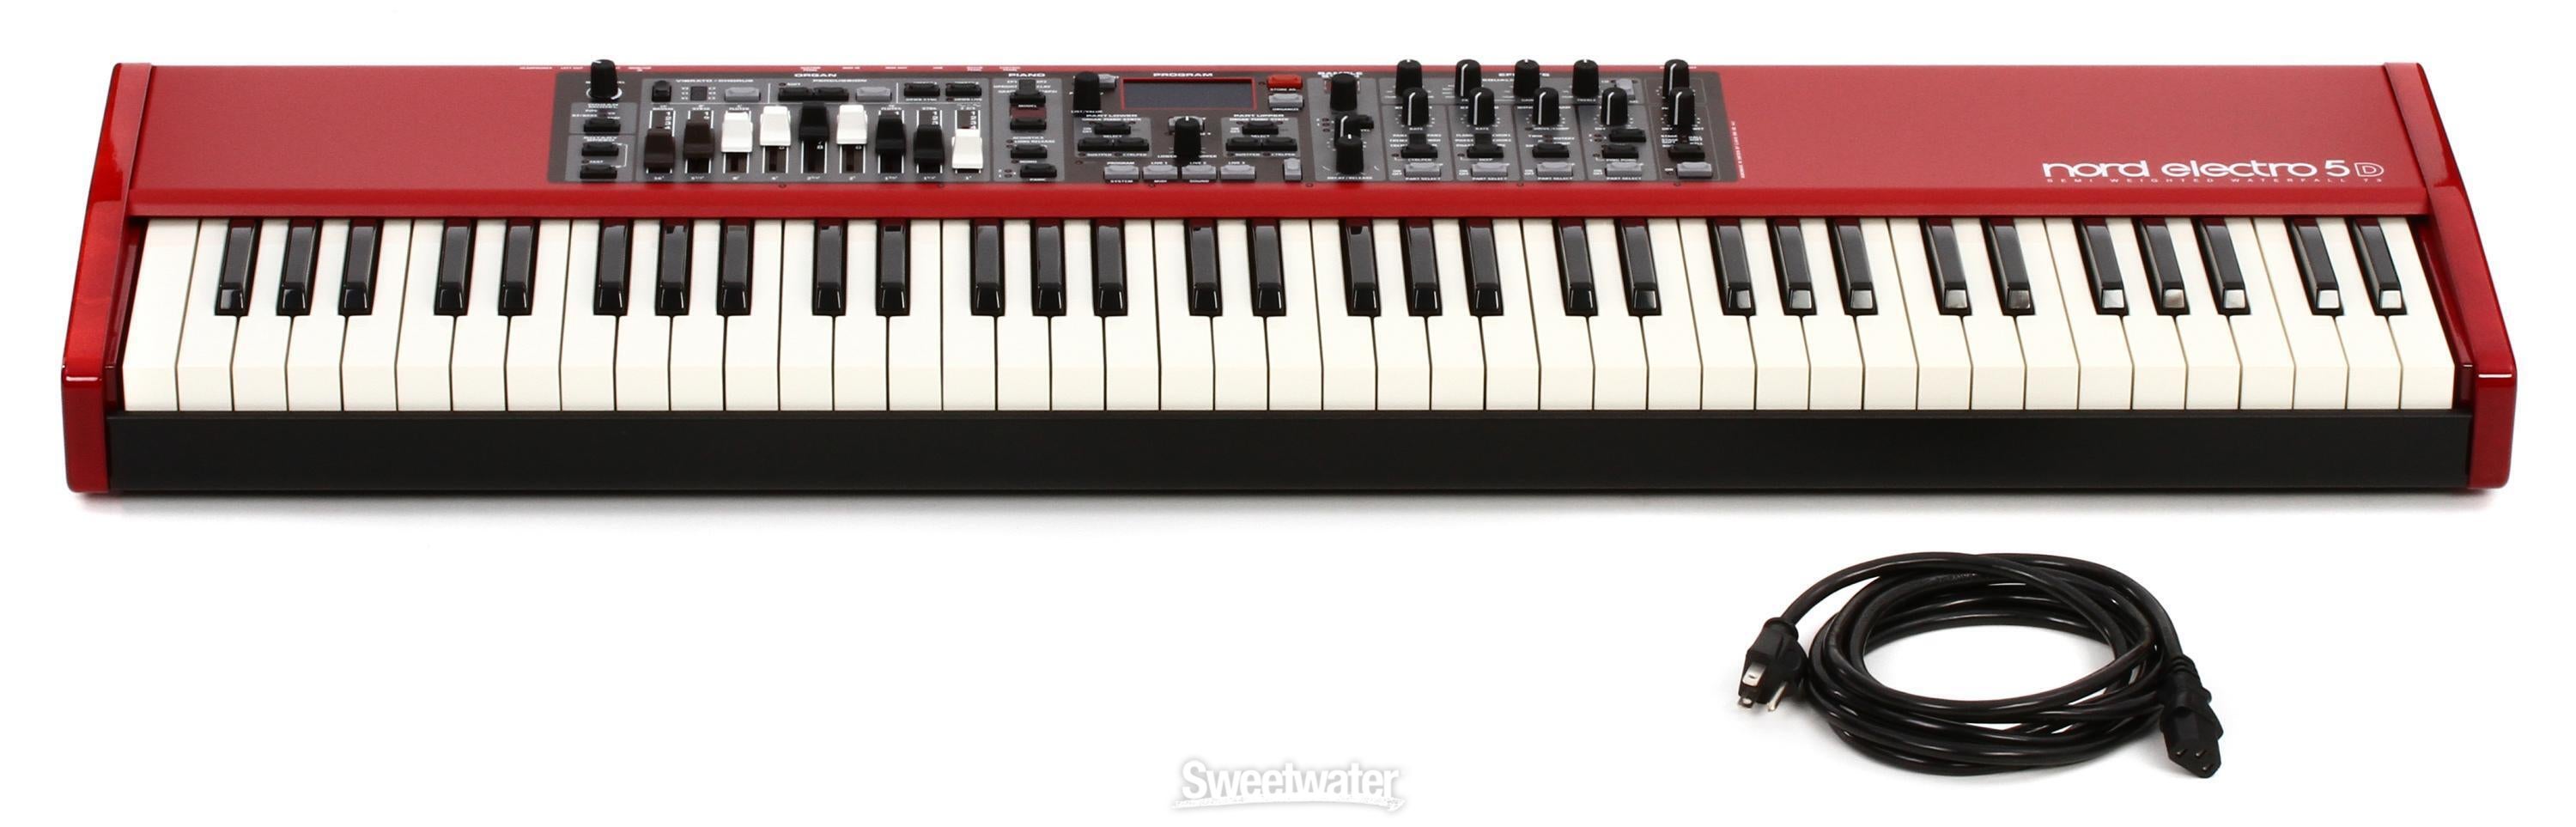 Nord Electro 5D 73 Reviews | Sweetwater